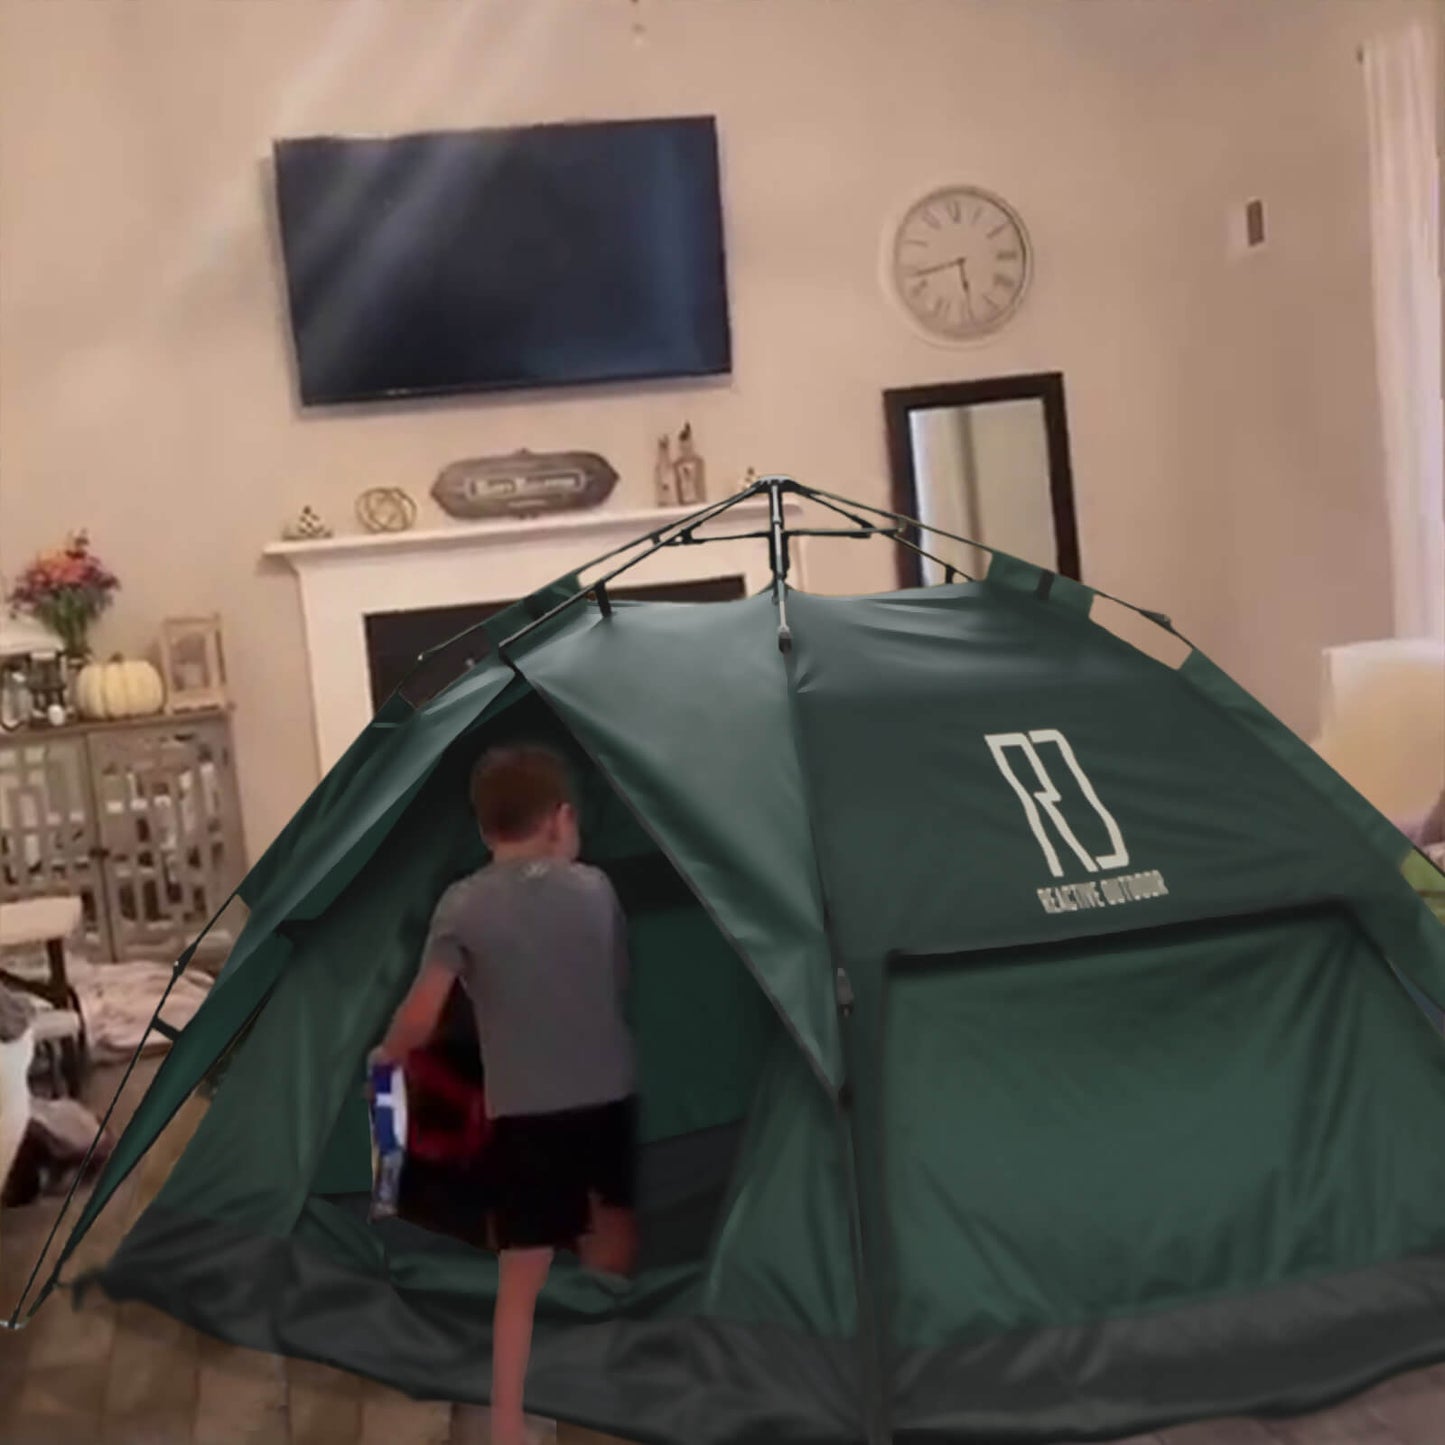 Large-Sized 3 Secs Tent (For 2-3 Person, US)